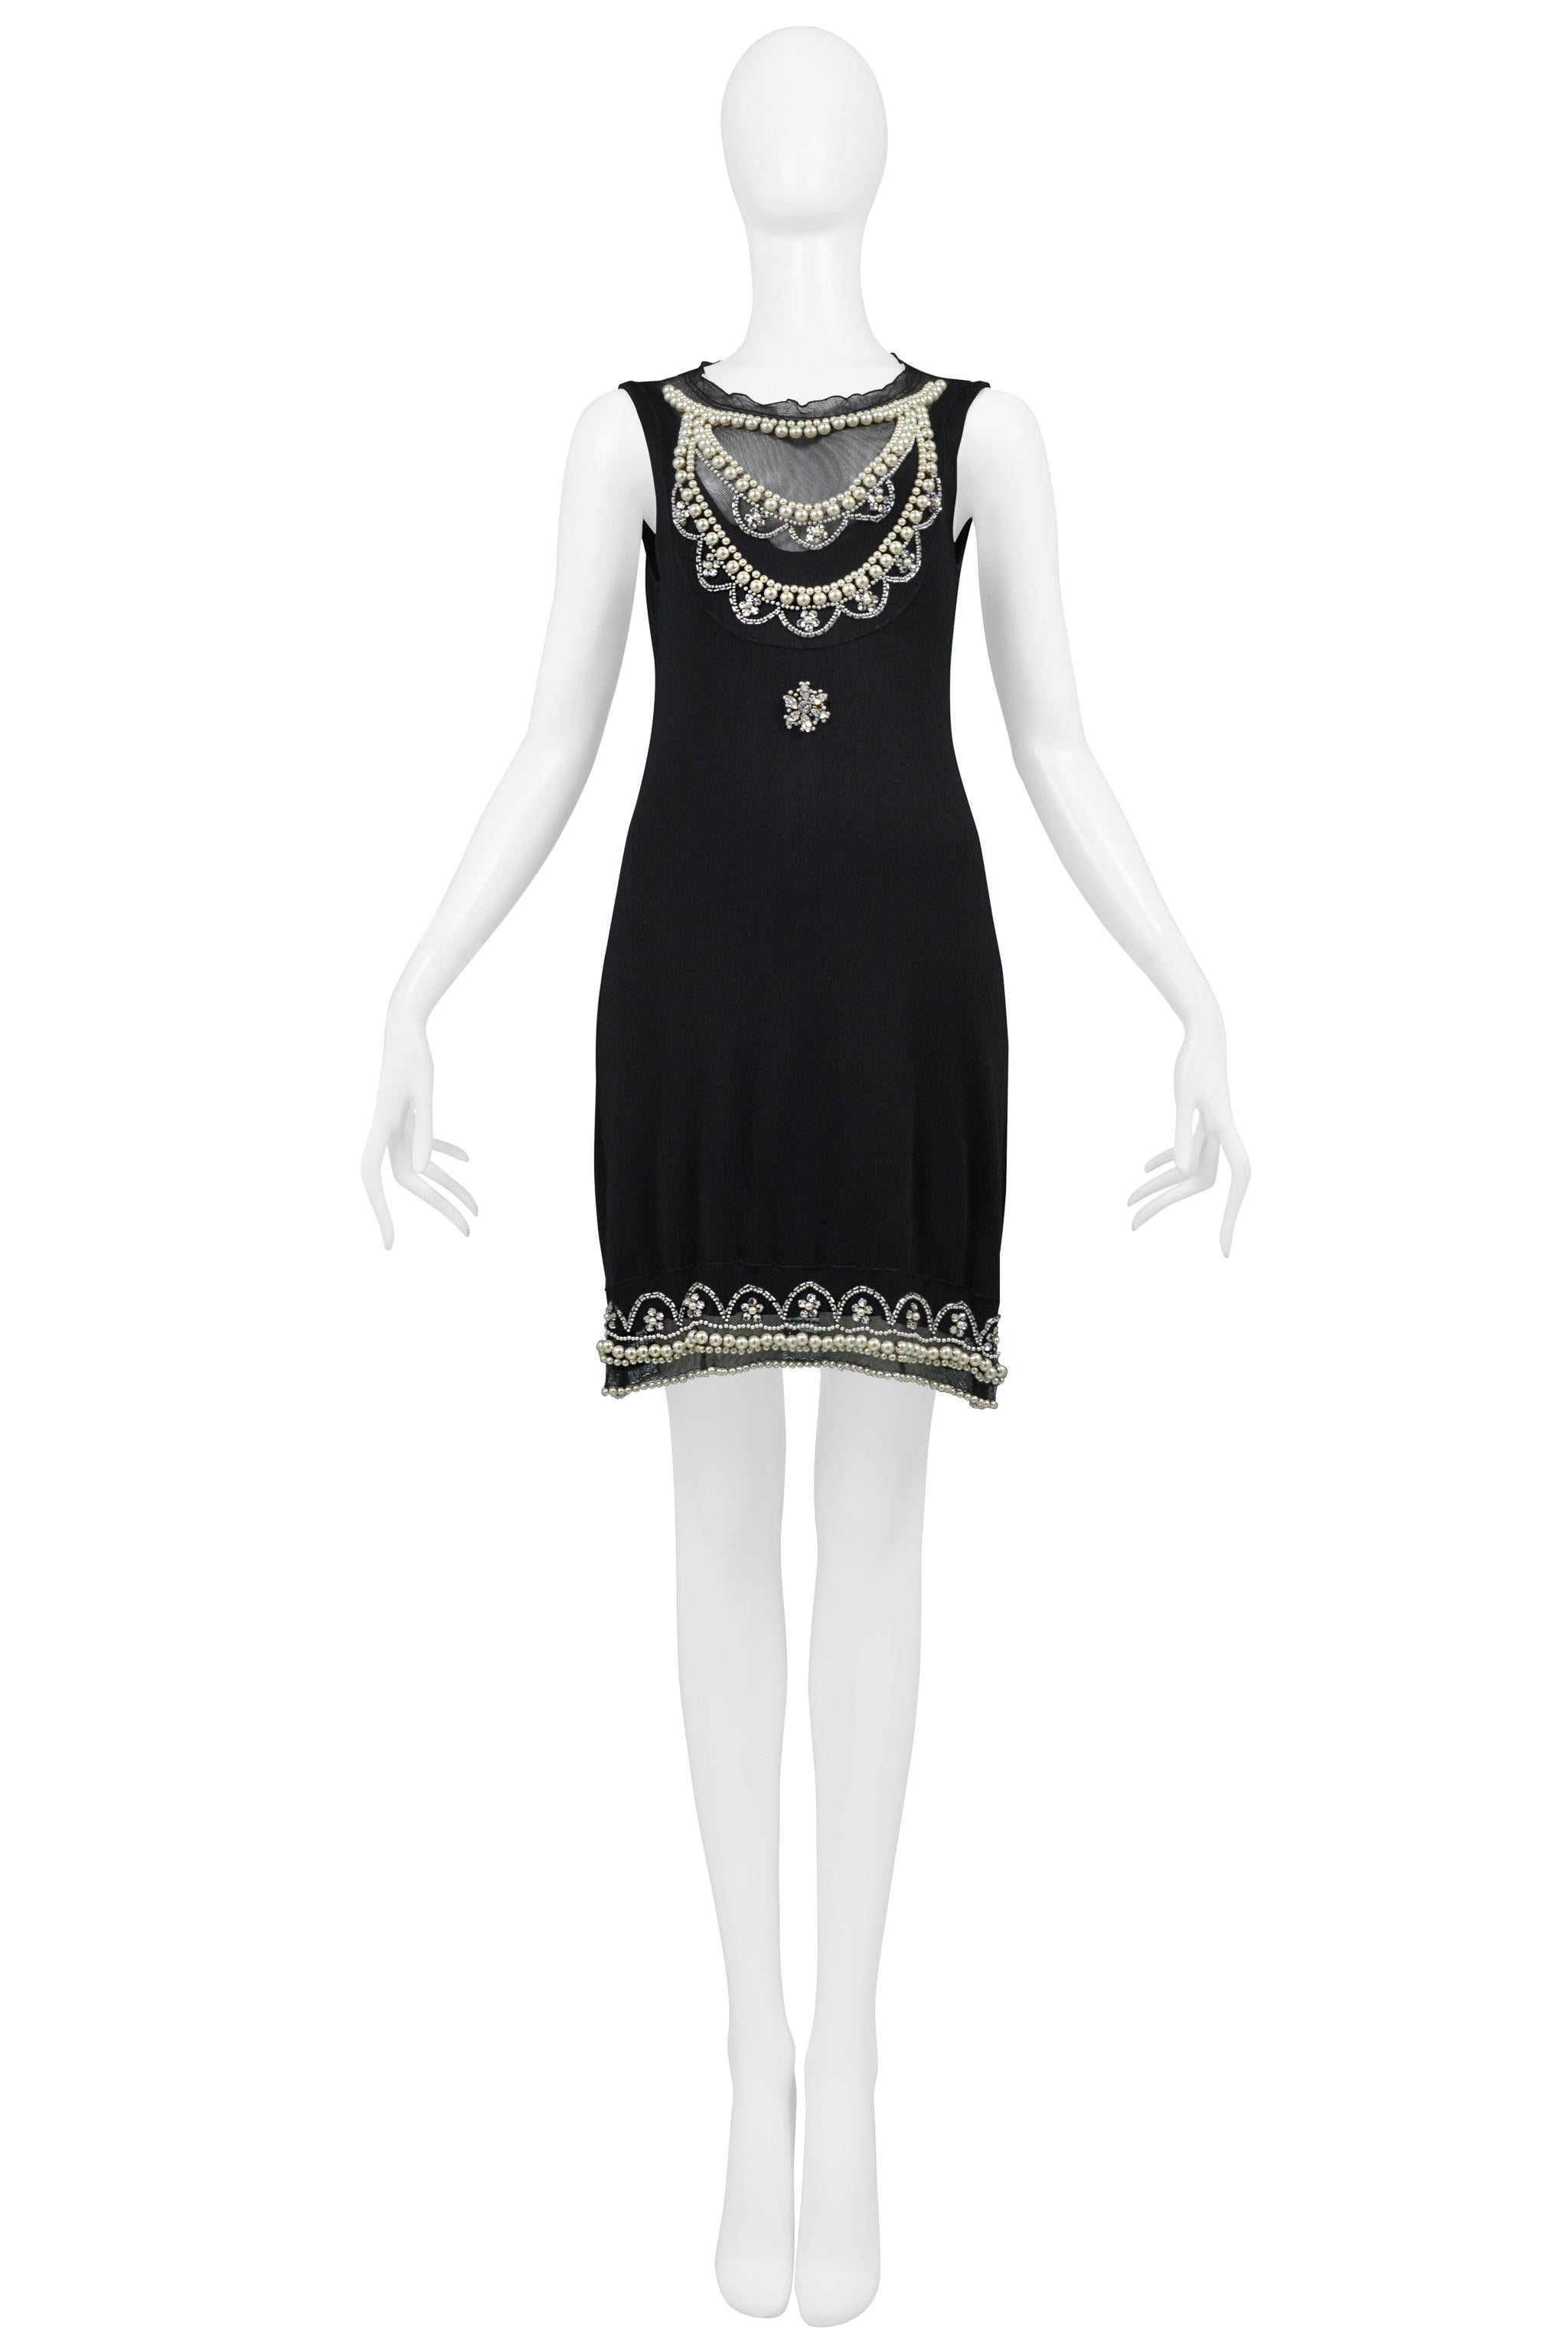 Resurrection Vintage is excited to offer a vintage Christian Dior by John Galliano black knit tank dress featuring pearls and clear rhinestones at the neckline, center front and hem, mesh inset at front bodice and back yoke, back keyhole with button